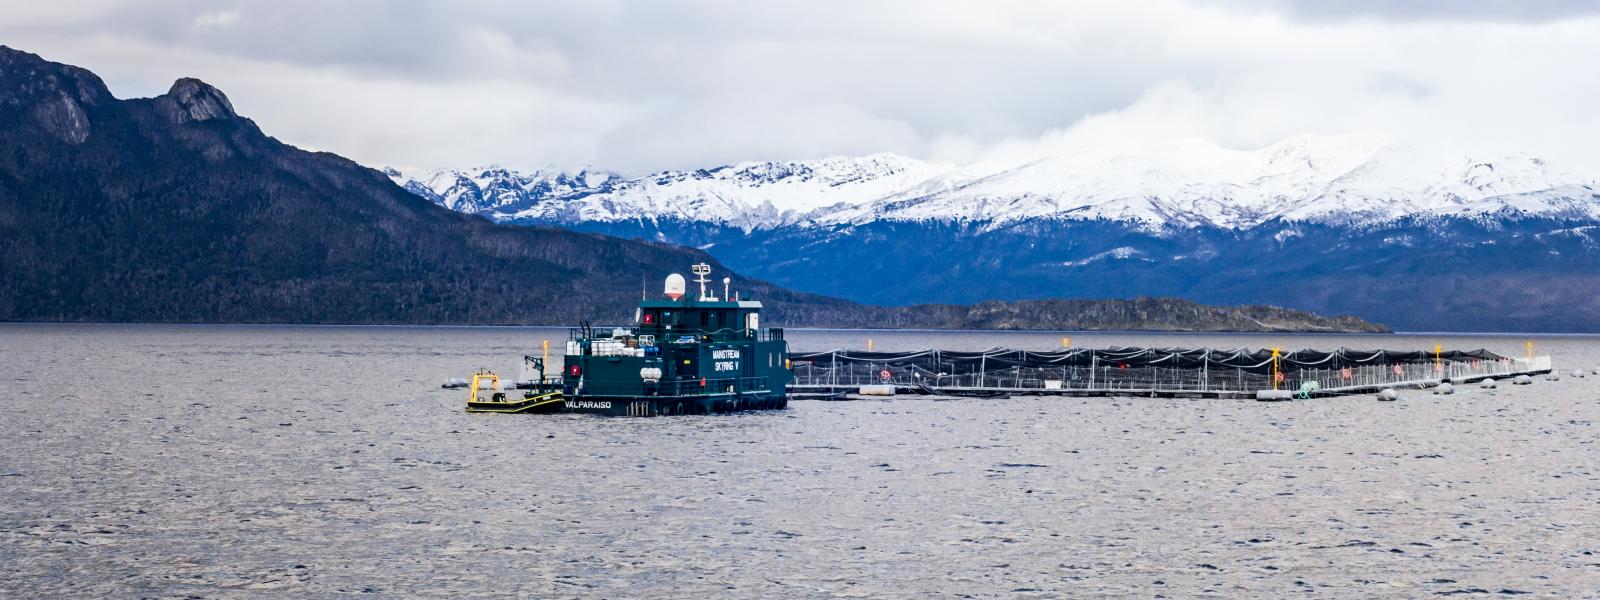 salmon farm in the water in front of a snowcapped mountain in Patagonia